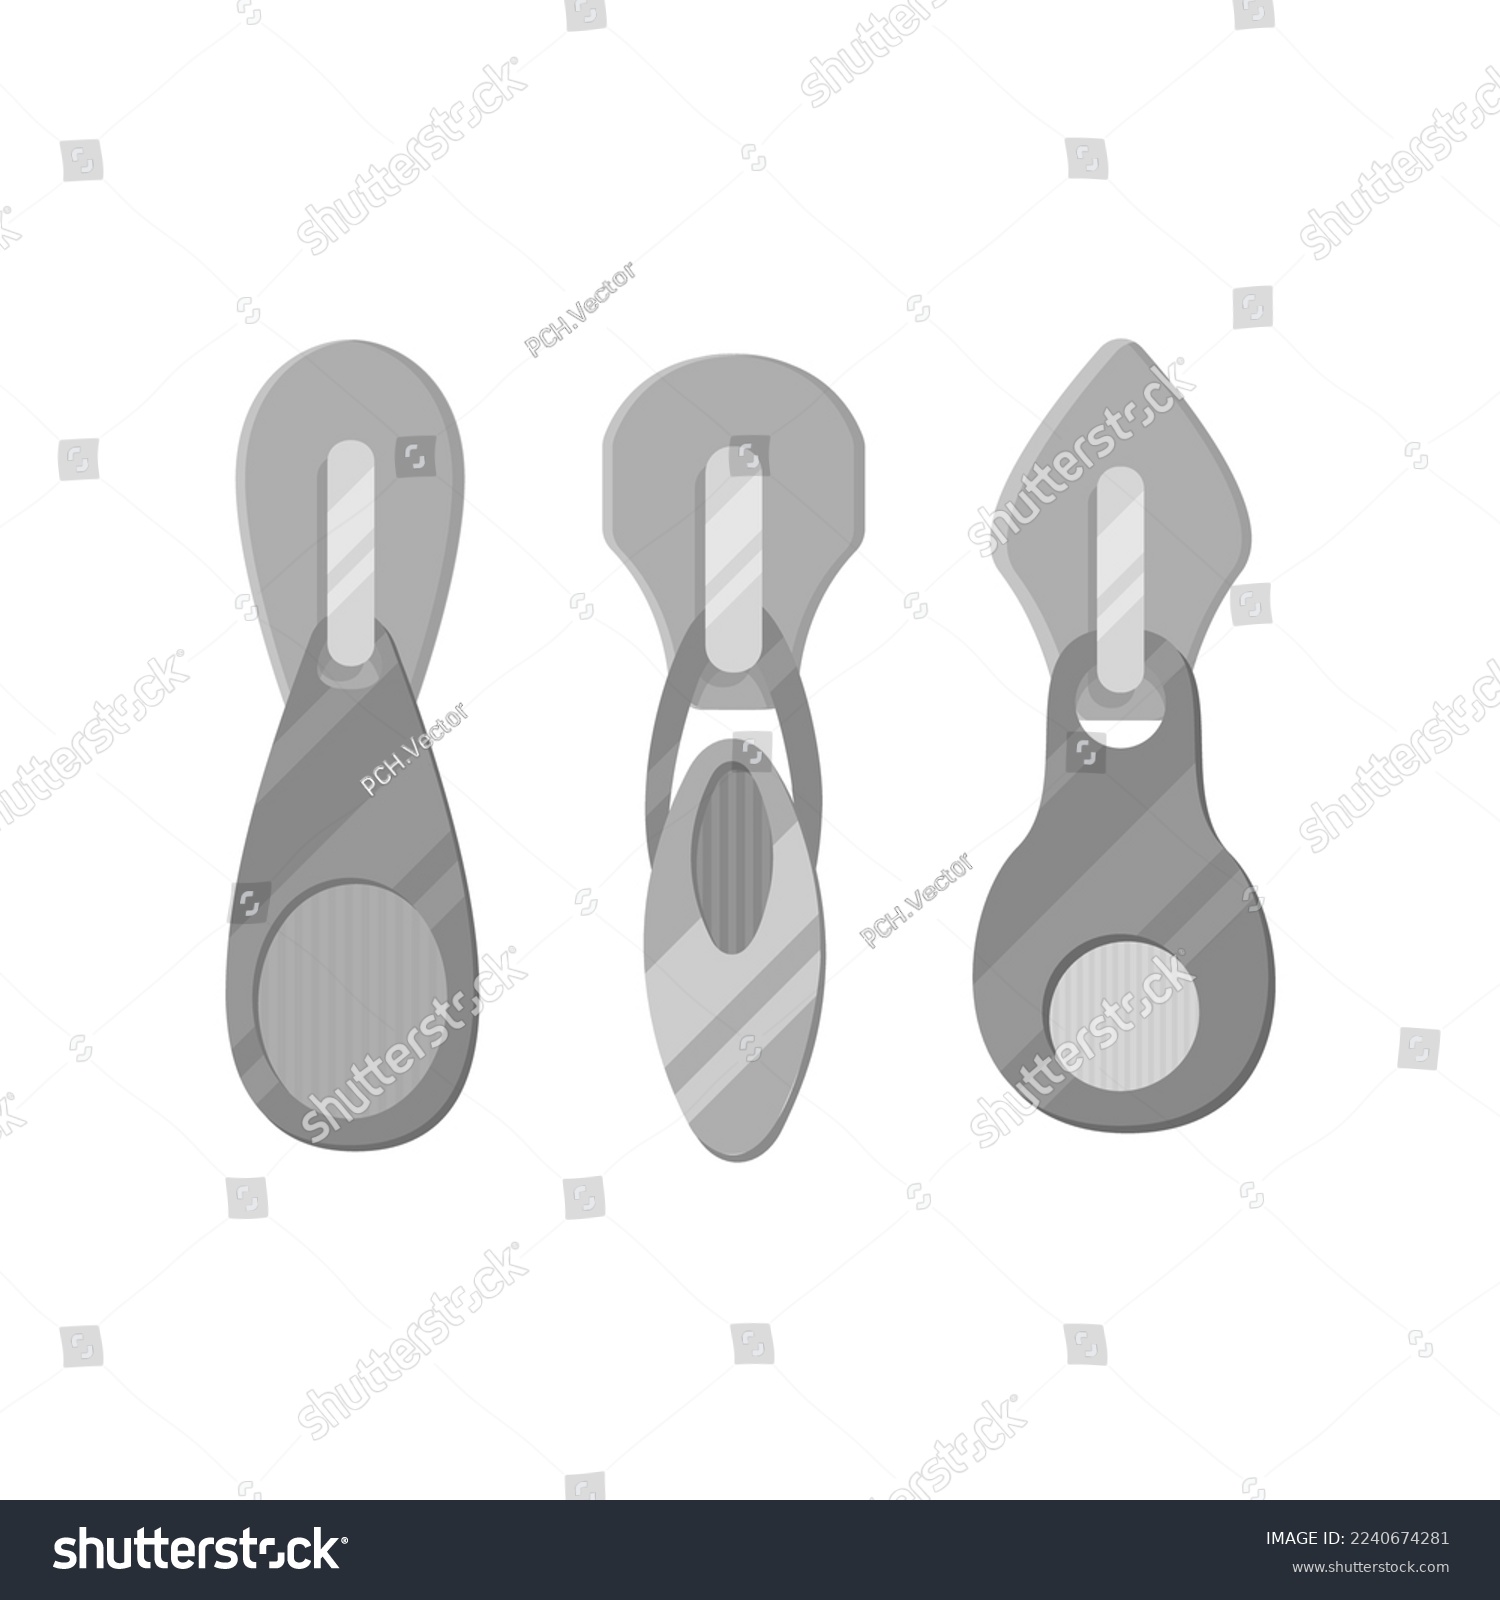 SVG of Modern silver zip sliders for clothes cartoon illustration. Silver zipper pullers with tassels for sportswear or leather backpacks. Fashion, metal accessories concept svg